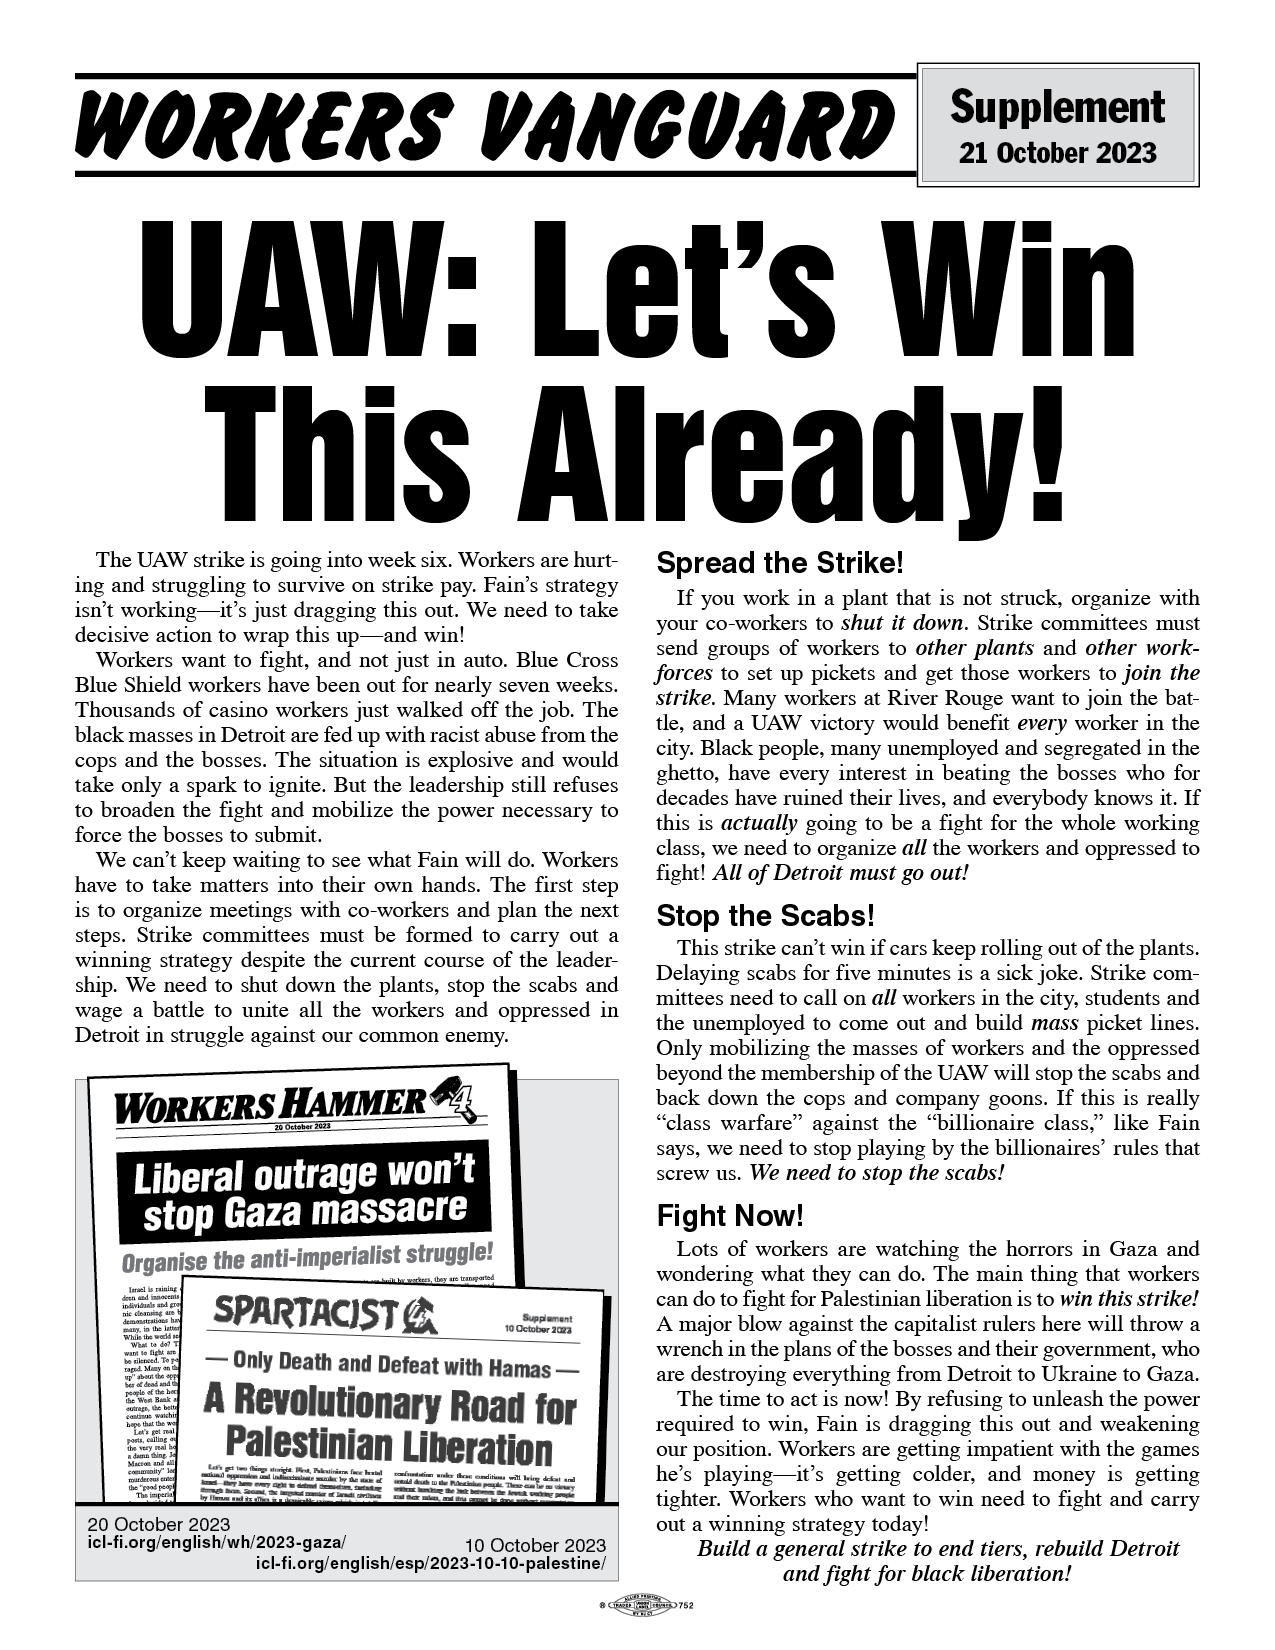 UAW: Let’s Win This Already!